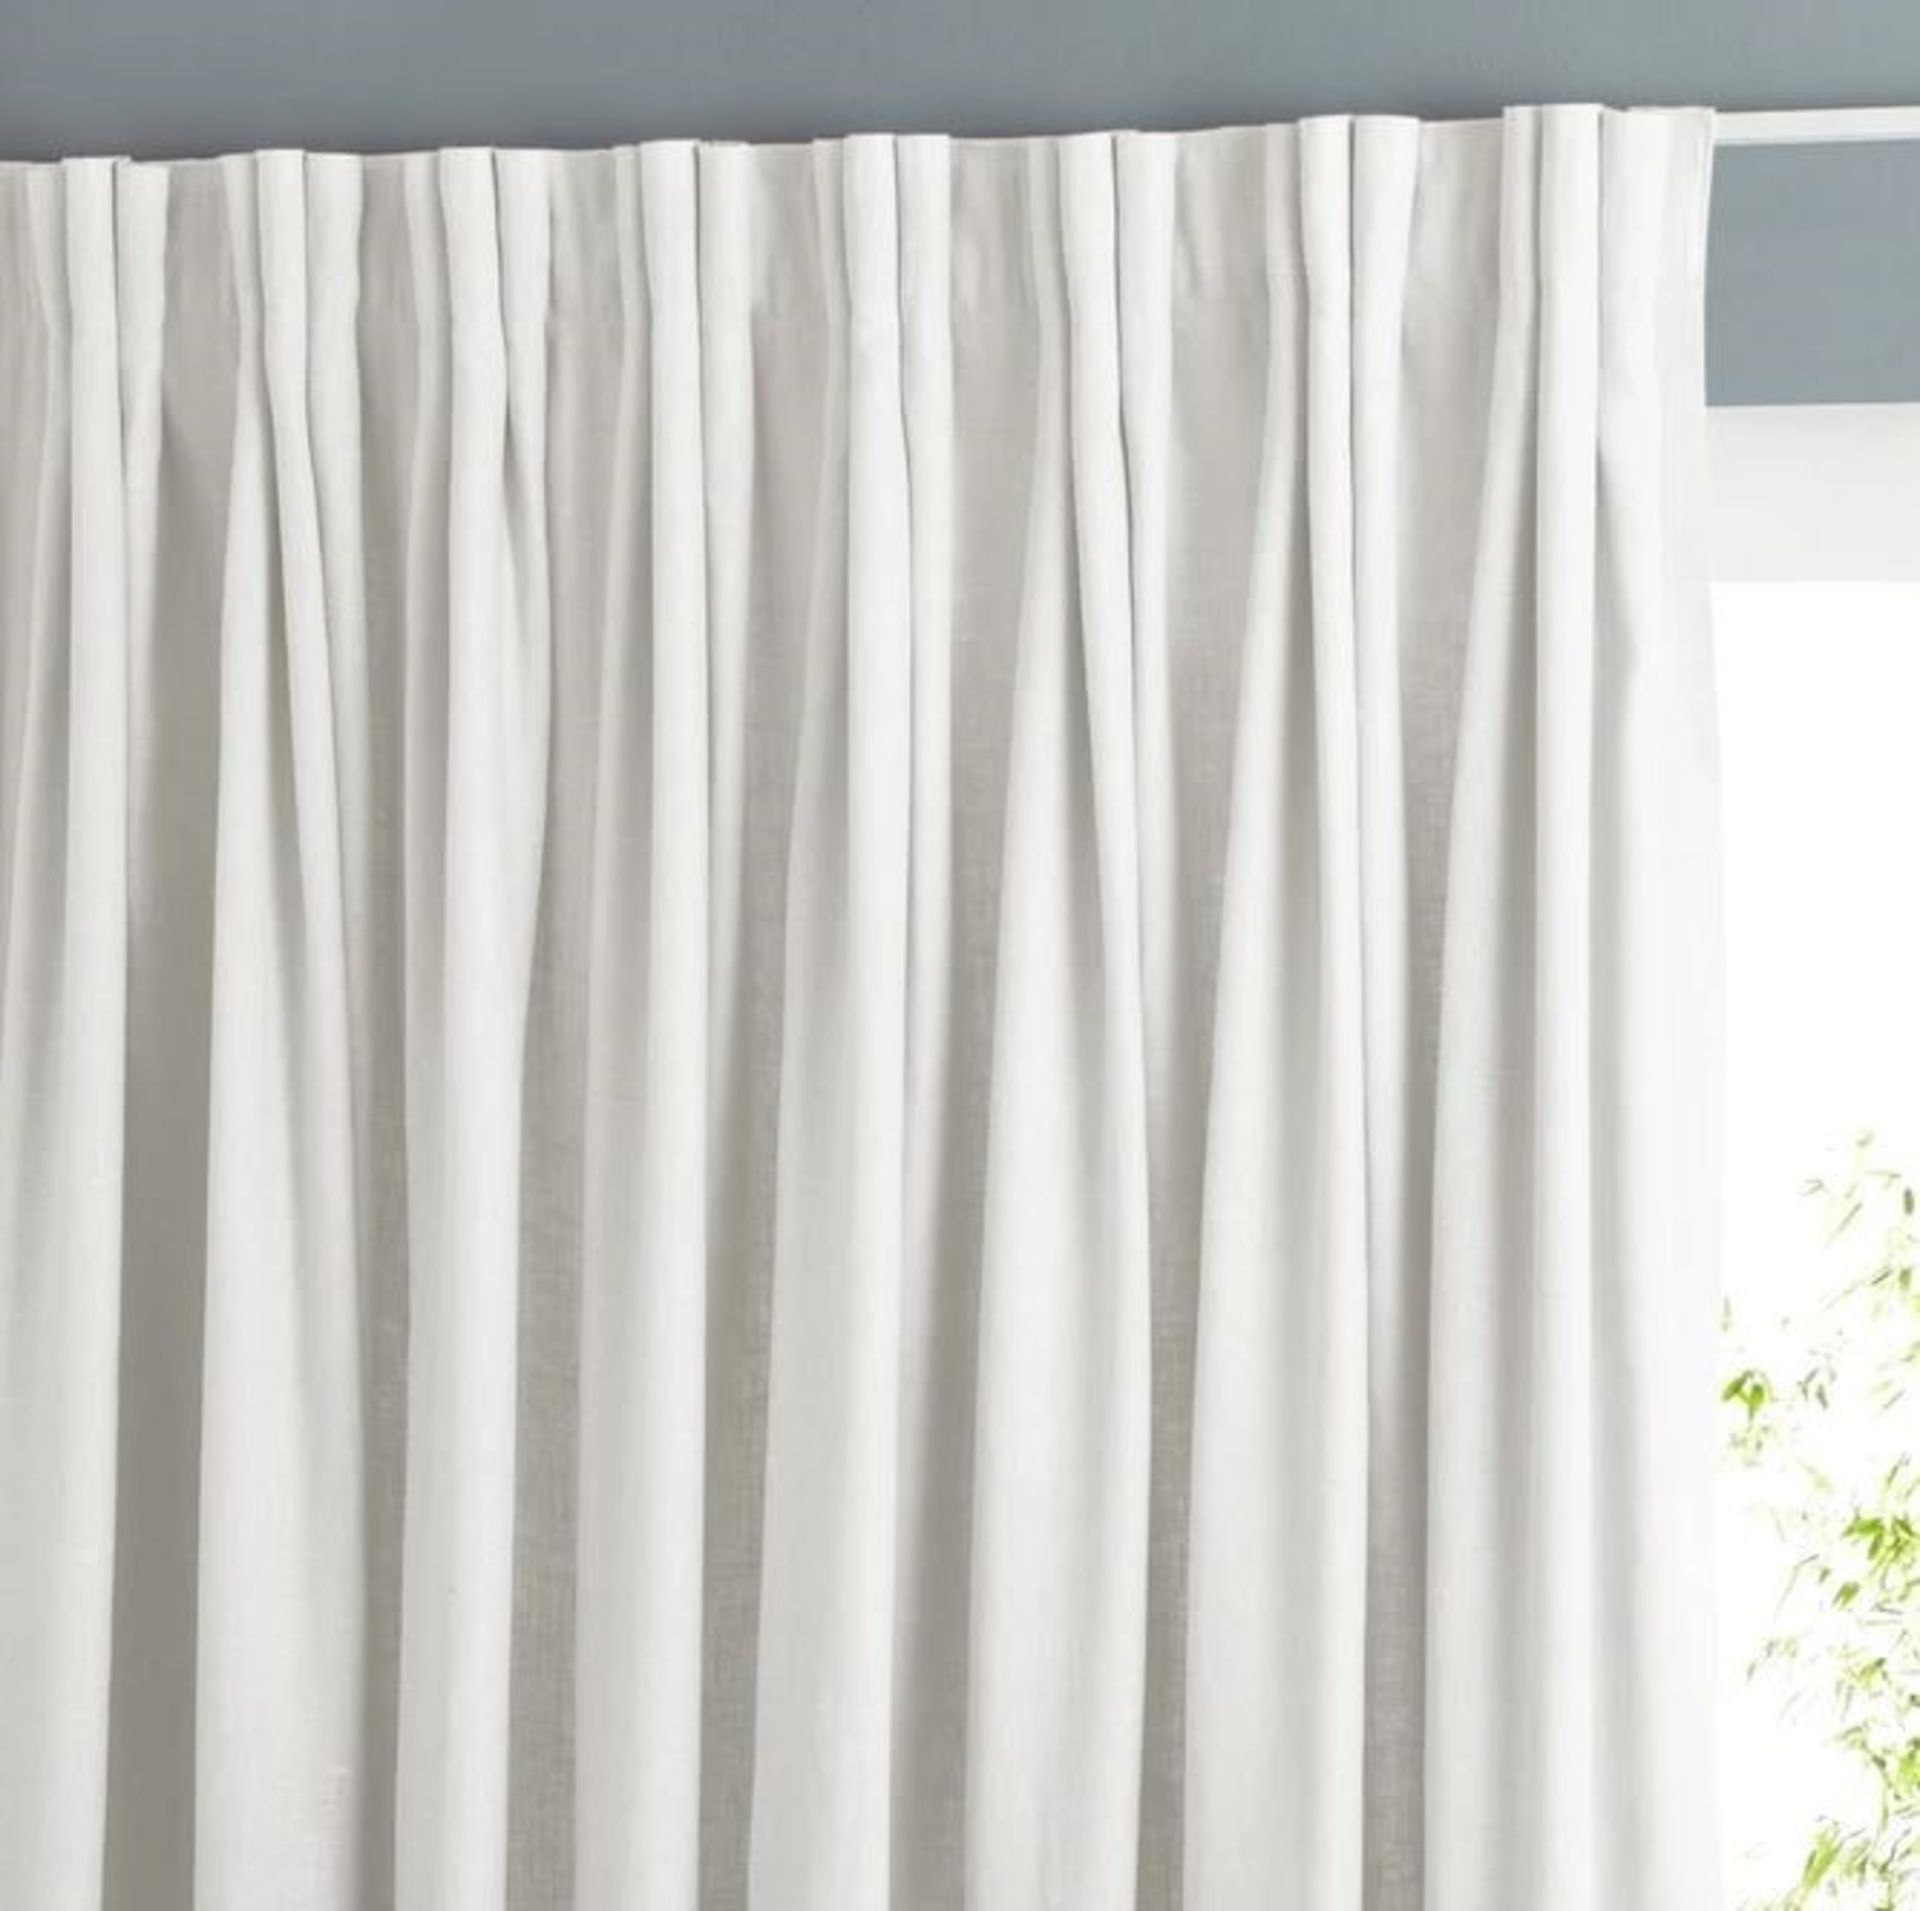 AM.PM COLIN SINGLE PURE LINEN LINED CURTAIN WITH PINCH PLEATS - WHITE / SIZE: W420 X D350CM / RRP £